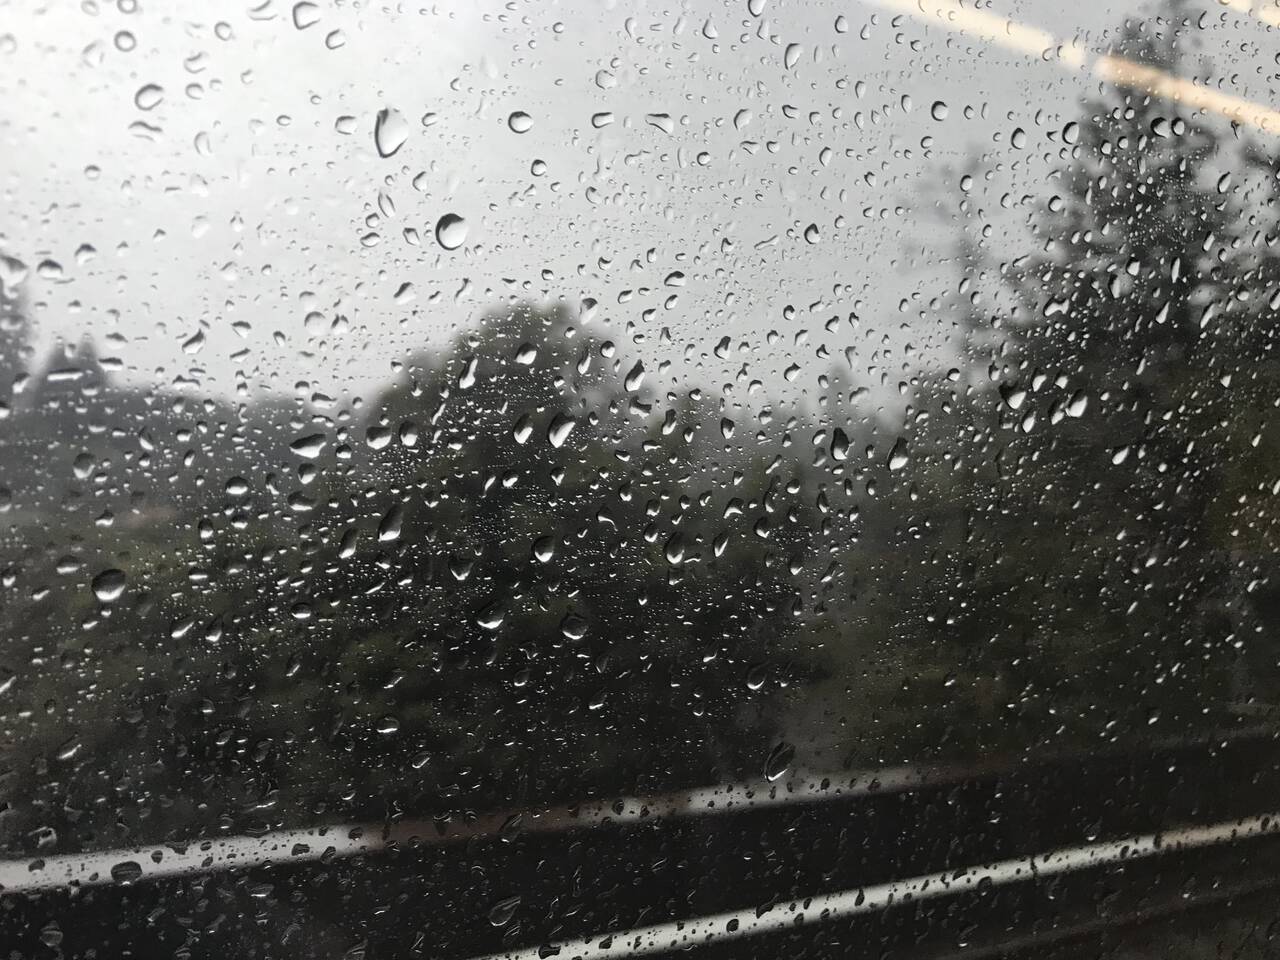 The view from the train to Orinda